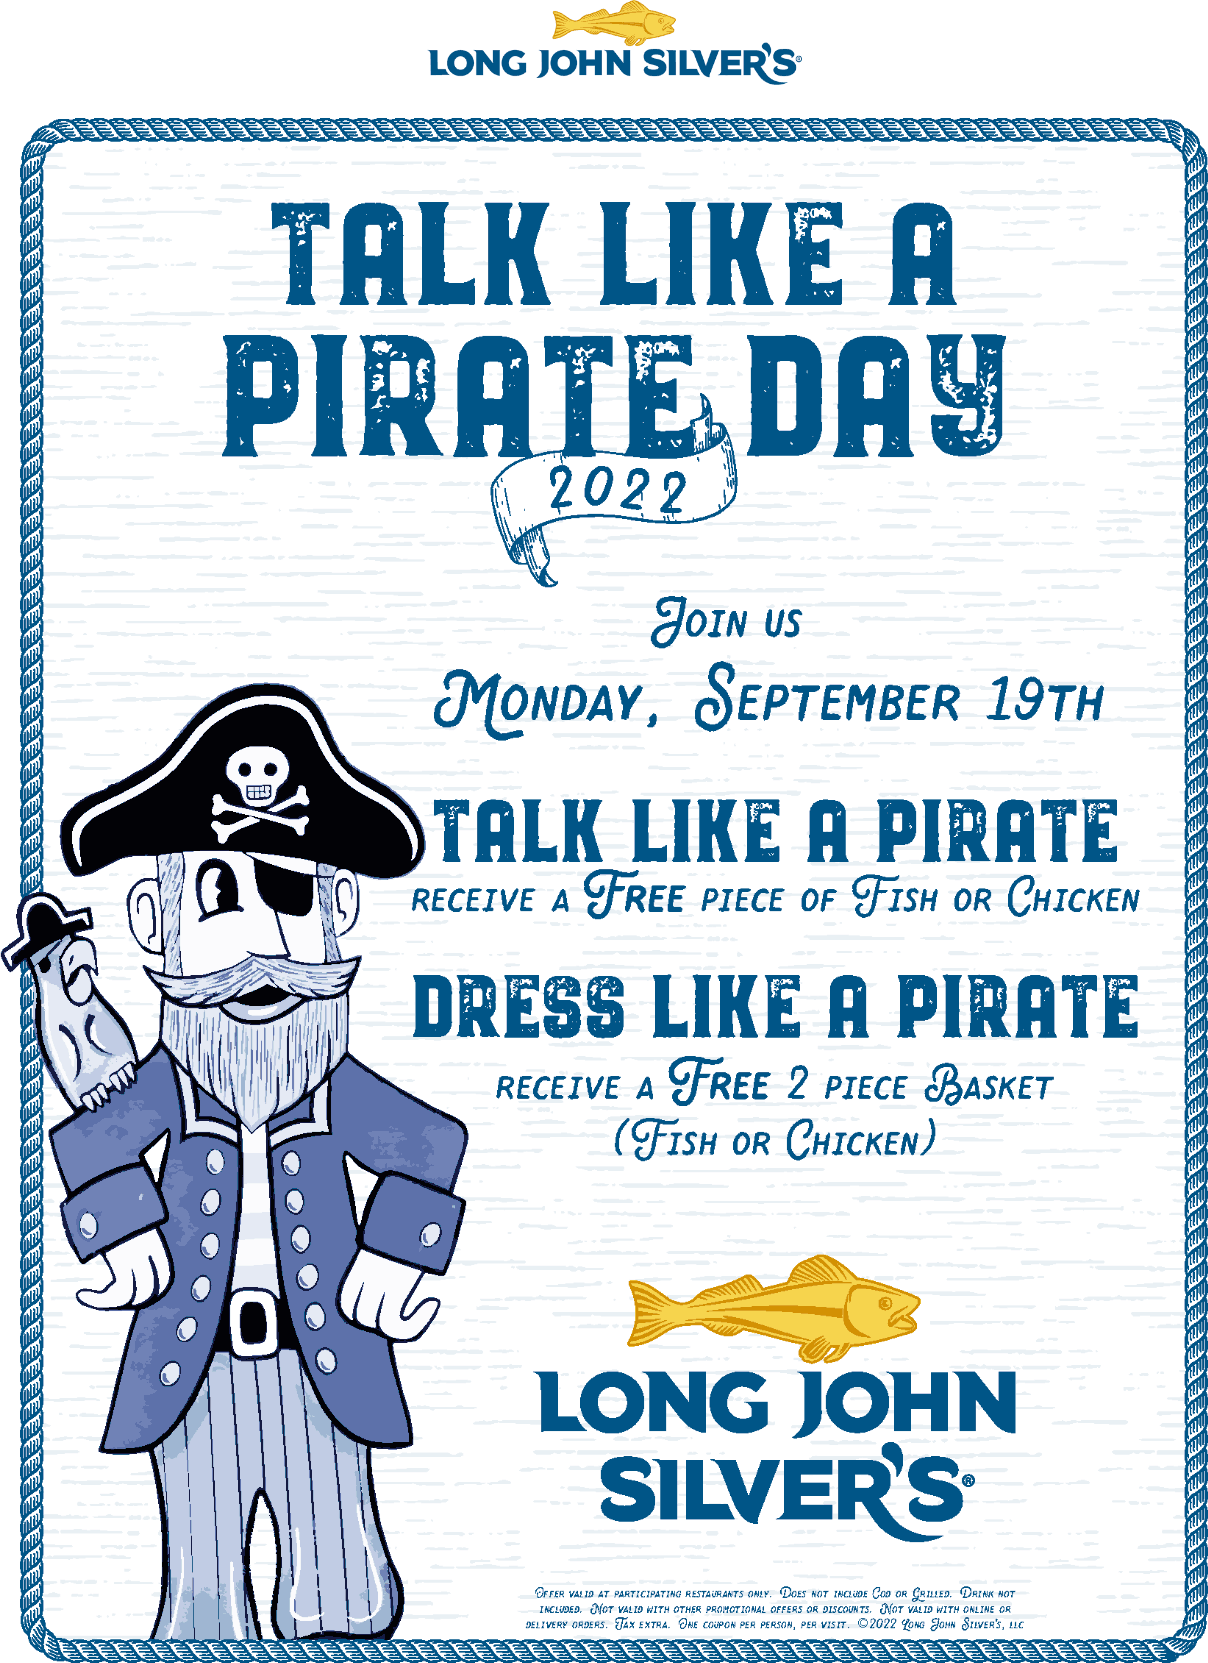 Long John Silvers restaurants Coupon  Talk or dress like a pirate for free fish or chicken today at Long John Silvers #longjohnsilvers 